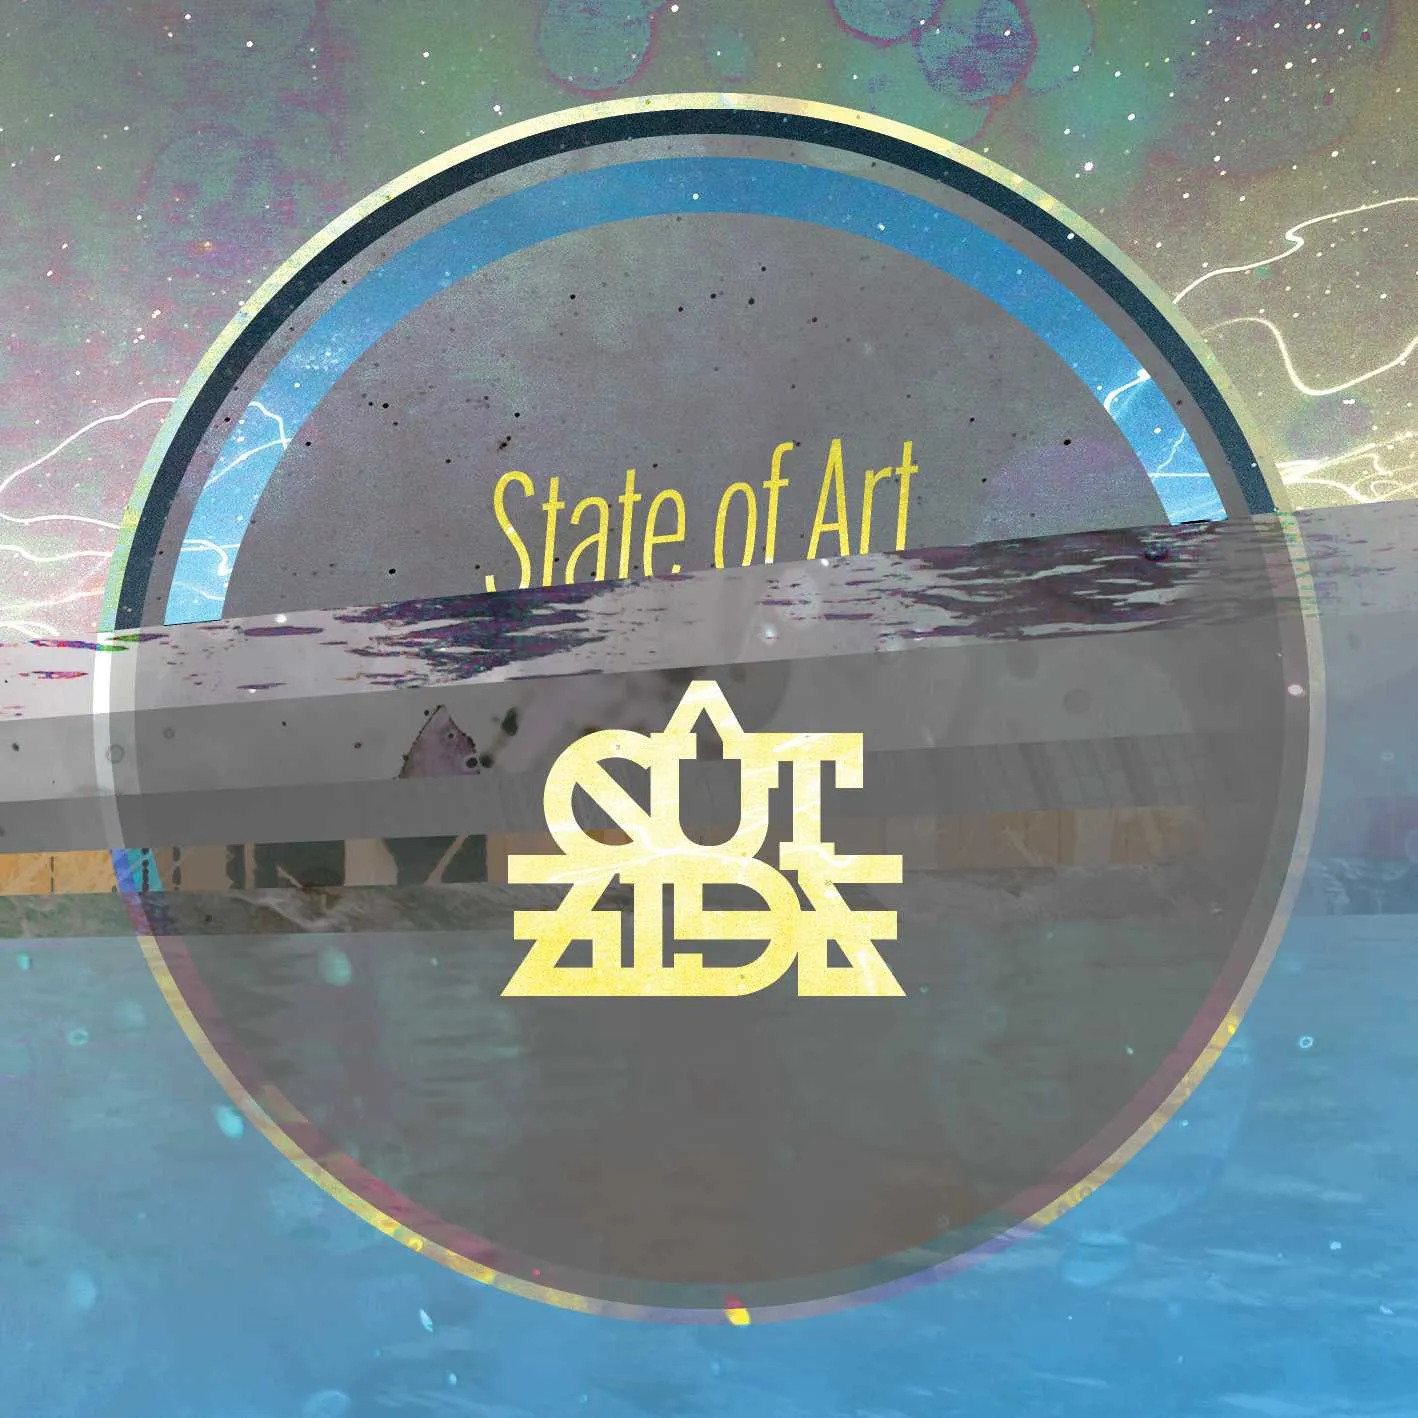 Cover of "State of Art" by Cutside